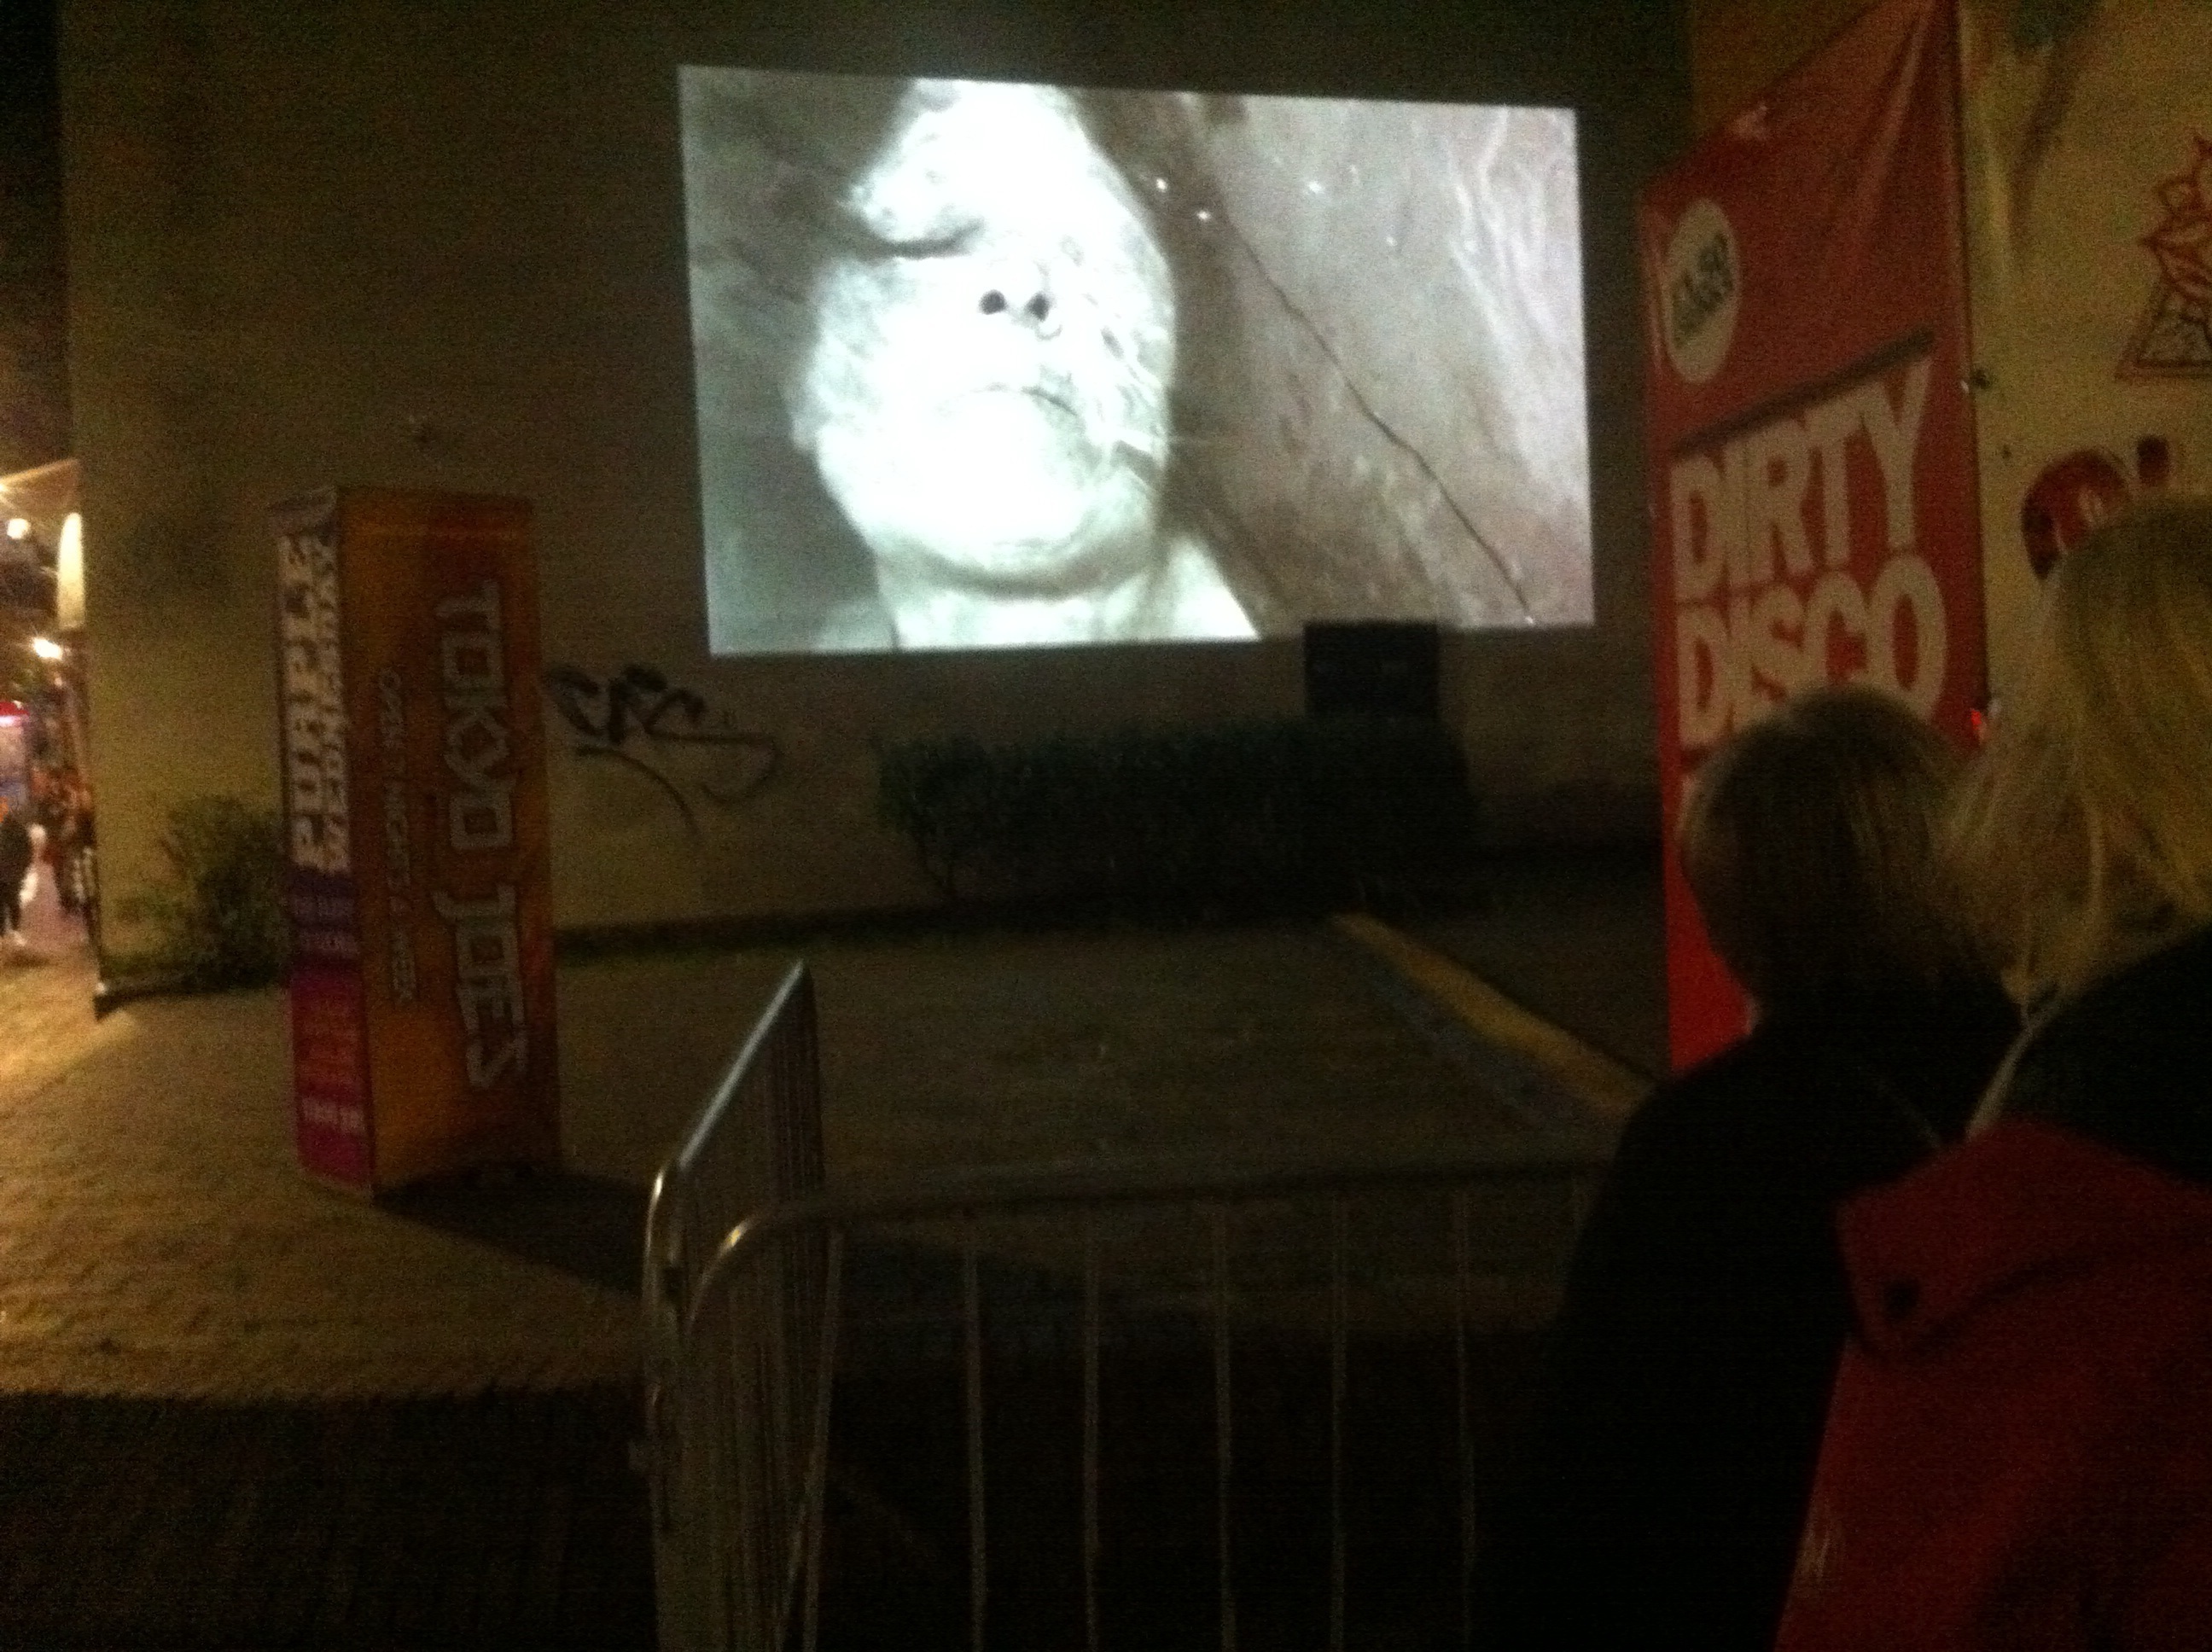 Installation view of a film projection featuring a portrait of a woman's face.